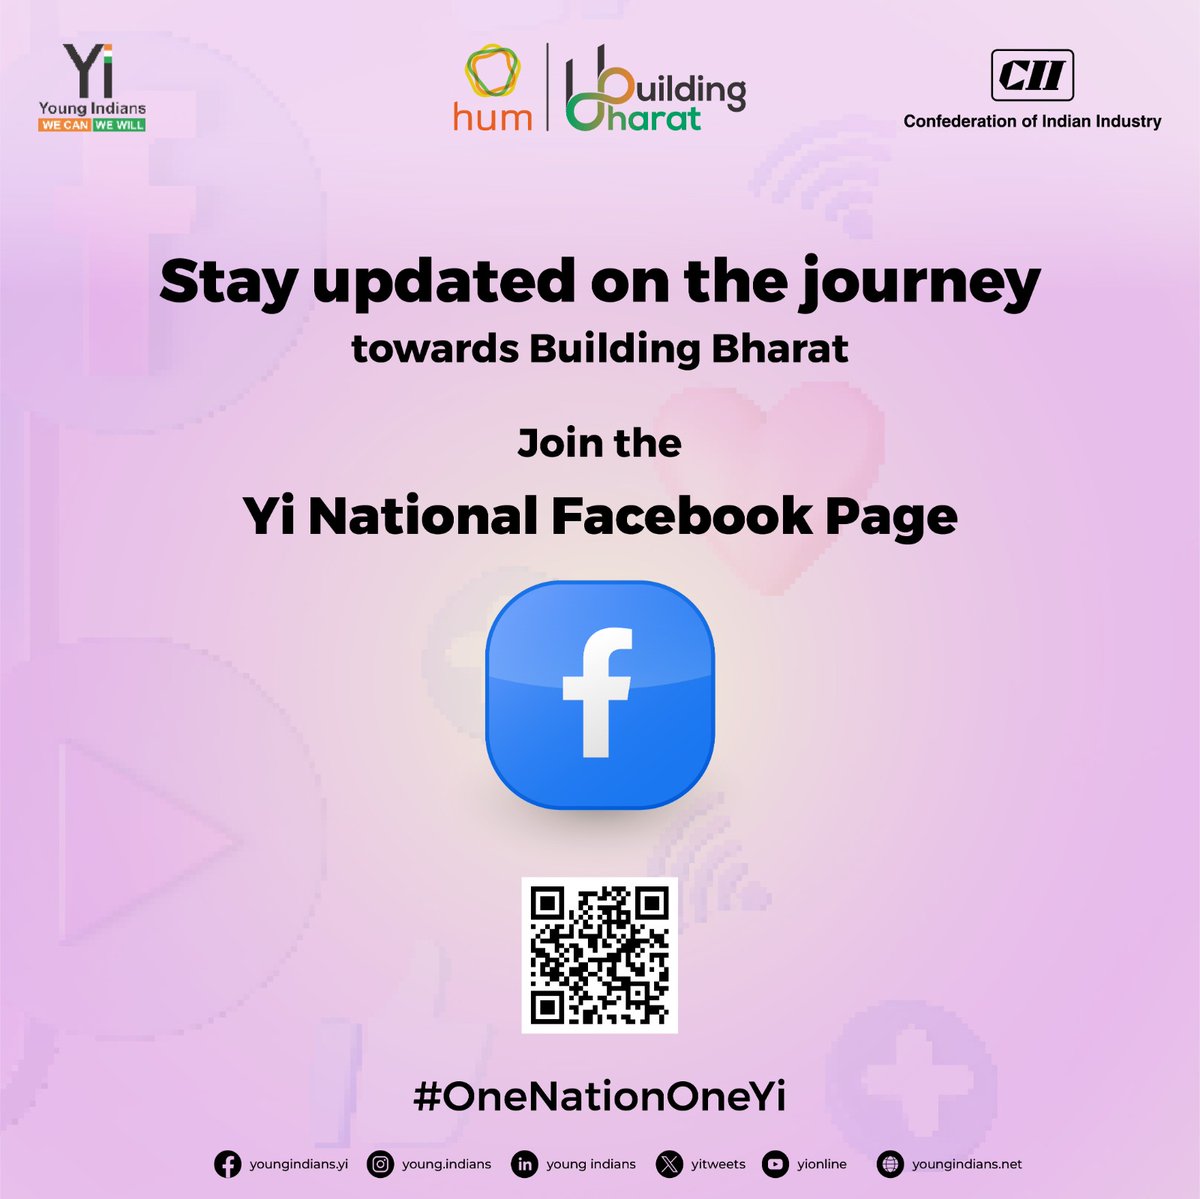 Embrace the power of unity by joining the dynamic Yi National Page on Facebook. Connect with like-minded individuals from across the nation as we collaborate, innovate, and drive positive change together. facebook.com/YoungIndians.Y… #Yi #Cii #YoungIndians #buildingbharat #HUM